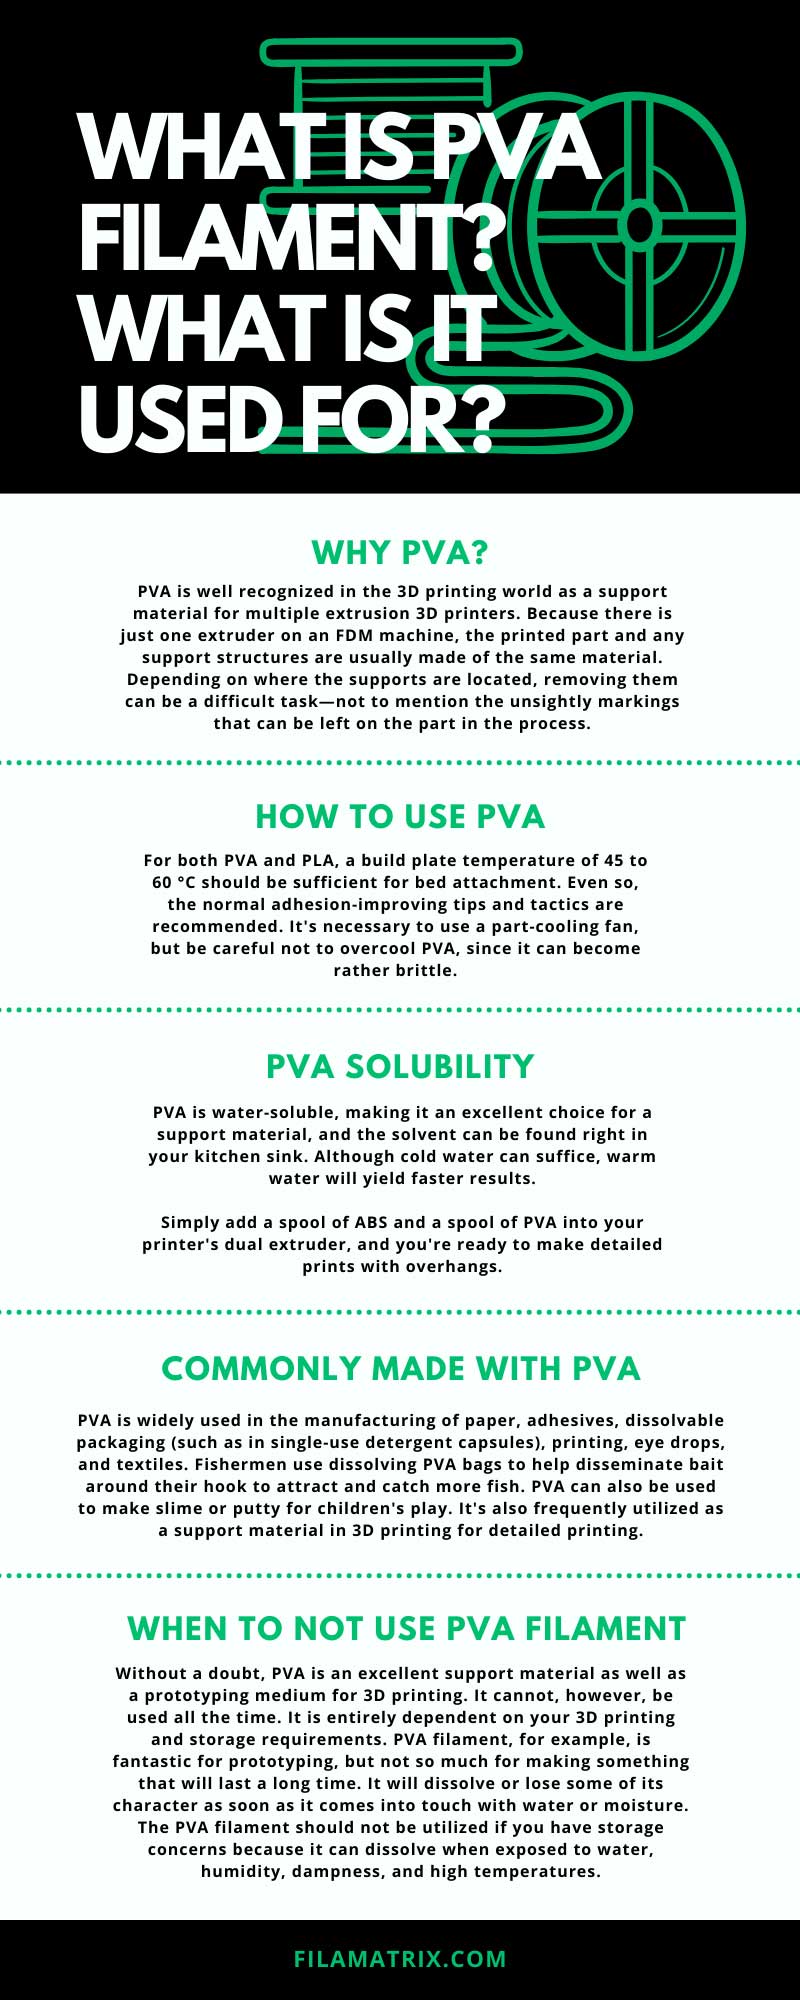 What Is PVA Filament? What Is It Used For?